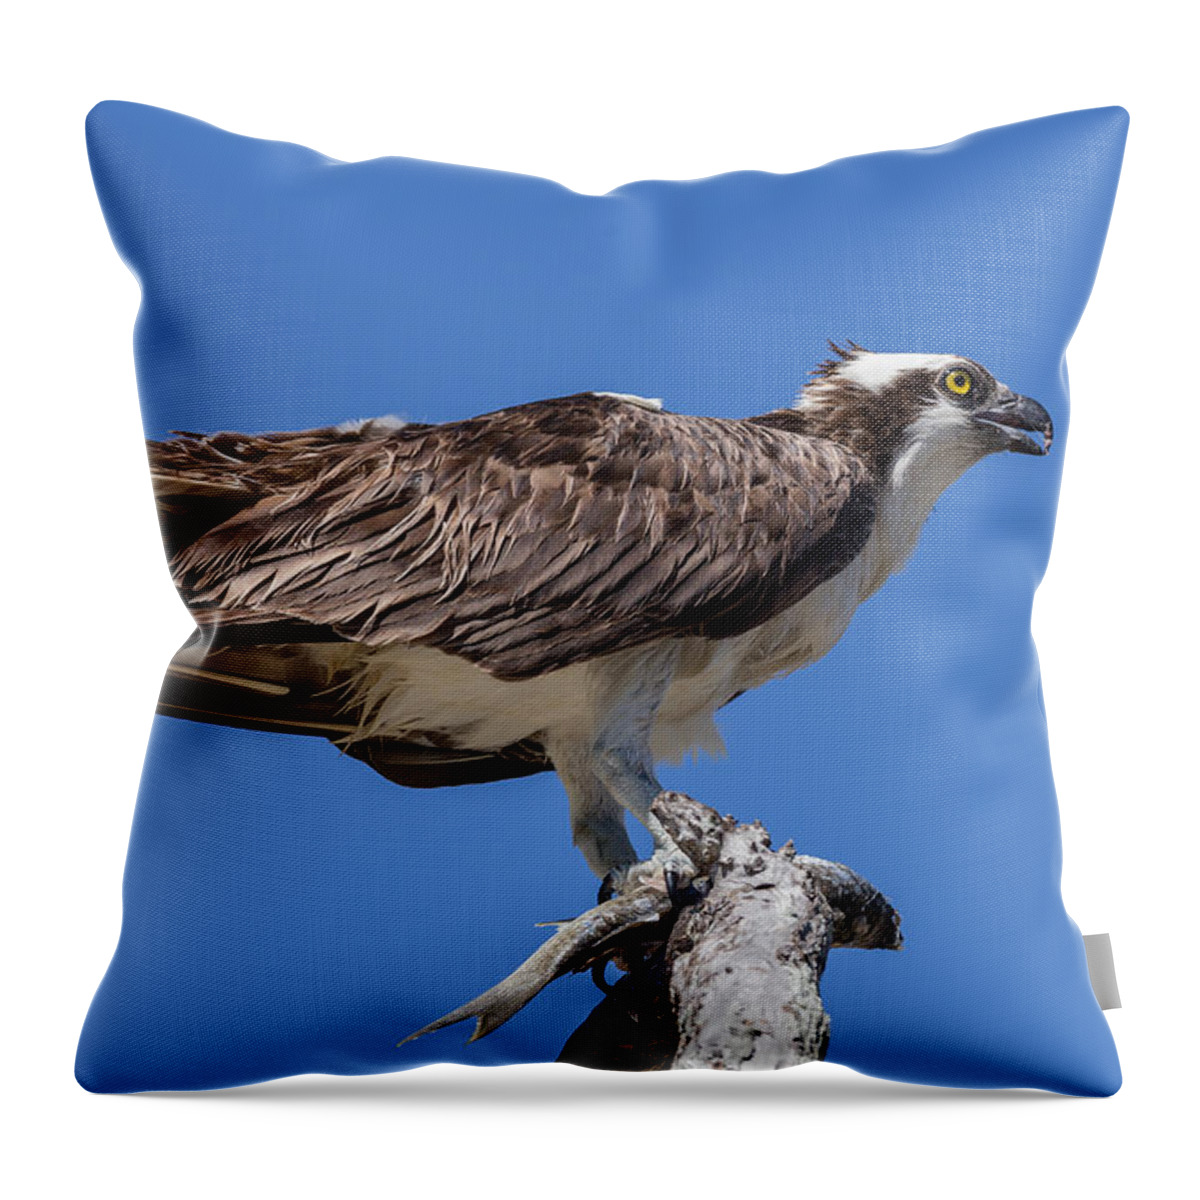 Florida Throw Pillow featuring the photograph Lunch by Paul Schultz